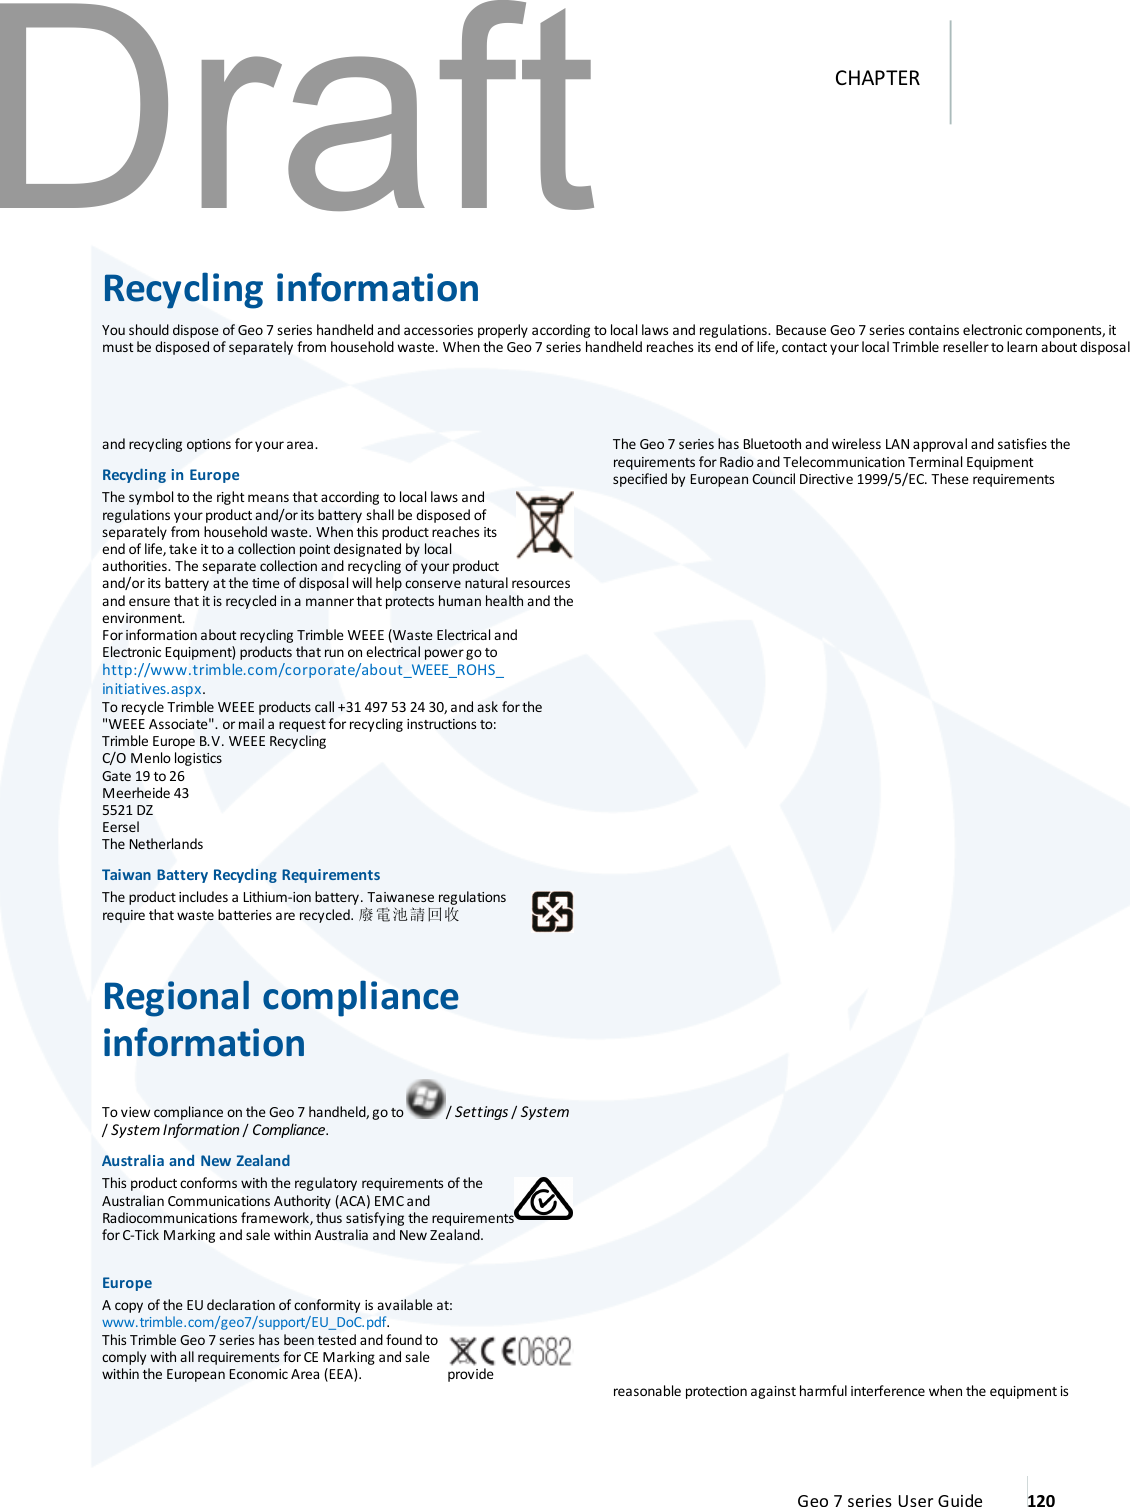 Recycling informationYou should dispose of Geo 7 series handheld and accessories properly according to local laws and regulations. Because Geo 7 series contains electronic components,itmust be disposed of separately from household waste. When the Geo 7 series handheld reaches its end of life,contact your local Trimble reseller to learn about disposaland recycling options for your area.Recycling in EuropeThe symbol to the right means that according to local laws andregulations your product and/or its battery shall be disposed ofseparately from household waste. When this productreaches itsend of life, take it to a collection point designated by localauthorities. The separate collection and recycling of your productand/or its battery at the time of disposal will help conserve natural resourcesand ensure that itis recycled in a manner that protects human health and theenvironment.Forinformation about recycling Trimble WEEE (Waste Electrical andElectronic Equipment) products that run on electrical power go tohttp://www.trimble.com/corporate/about_WEEE_ROHS_initiatives.aspx.To recycle Trimble WEEE products call +31 497 53 24 30,and ask forthe&quot;WEEE Associate&quot;. or mail a request for recycling instructions to:Trimble Europe B.V. WEEE RecyclingC/O Menlo logisticsGate 19 to 26Meerheide 435521 DZEerselThe NetherlandsTaiwan Battery Recycling RequirementsThe product includes a Lithium-ion battery. Taiwanese regulationsrequire that waste batteries are recycled. 廢電池請回收Regional complianceinformationTo view compliance on the Geo 7 handheld, go to / Settings /System/System Information /Compliance.Australia and NewZealandThis product conforms with the regulatory requirements of theAustralian Communications Authority (ACA) EMC andRadiocommunications framework, thus satisfying the requirementsforC-Tick Marking and sale within Australia and New Zealand.EuropeA copy of the EU declaration of conformity is available at:www.trimble.com/geo7/support/EU_DoC.pdf.This Trimble Geo 7 series has been tested and found tocomply with all requirements forCE Marking and salewithin the European Economic Area (EEA).The Geo 7 series has Bluetooth and wireless LAN approval and satisfies therequirements for Radio and Telecommunication Terminal Equipmentspecified by European Council Directive 1999/5/EC. These requirementsprovide reasonable protection againstharmful interference when the equipmentisGeo 7 series User Guide 120CHAPTERDraft